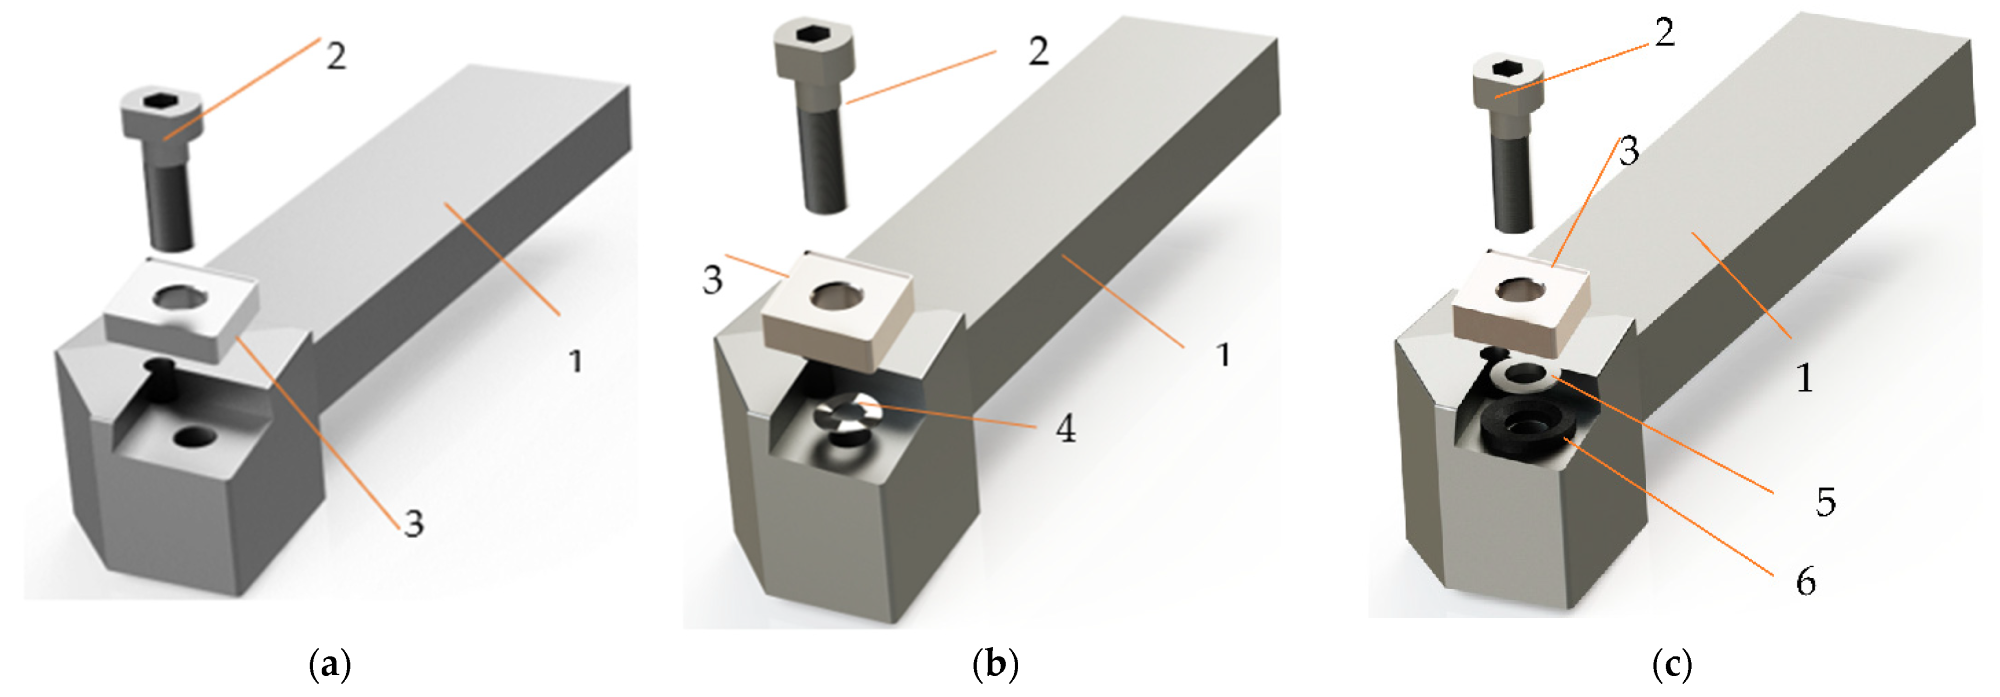 Tools for longitudinal turning: (a)—in the classic version (V01); (b)—with improved constructive form with a spring washer (V02), (c)—with improved constructive form with two spring washers (V03), 1—knife body; 2—screw fixing; 3—removable plate, 4—spring washer, 5—spherical washer, 6—spherical washer holder.